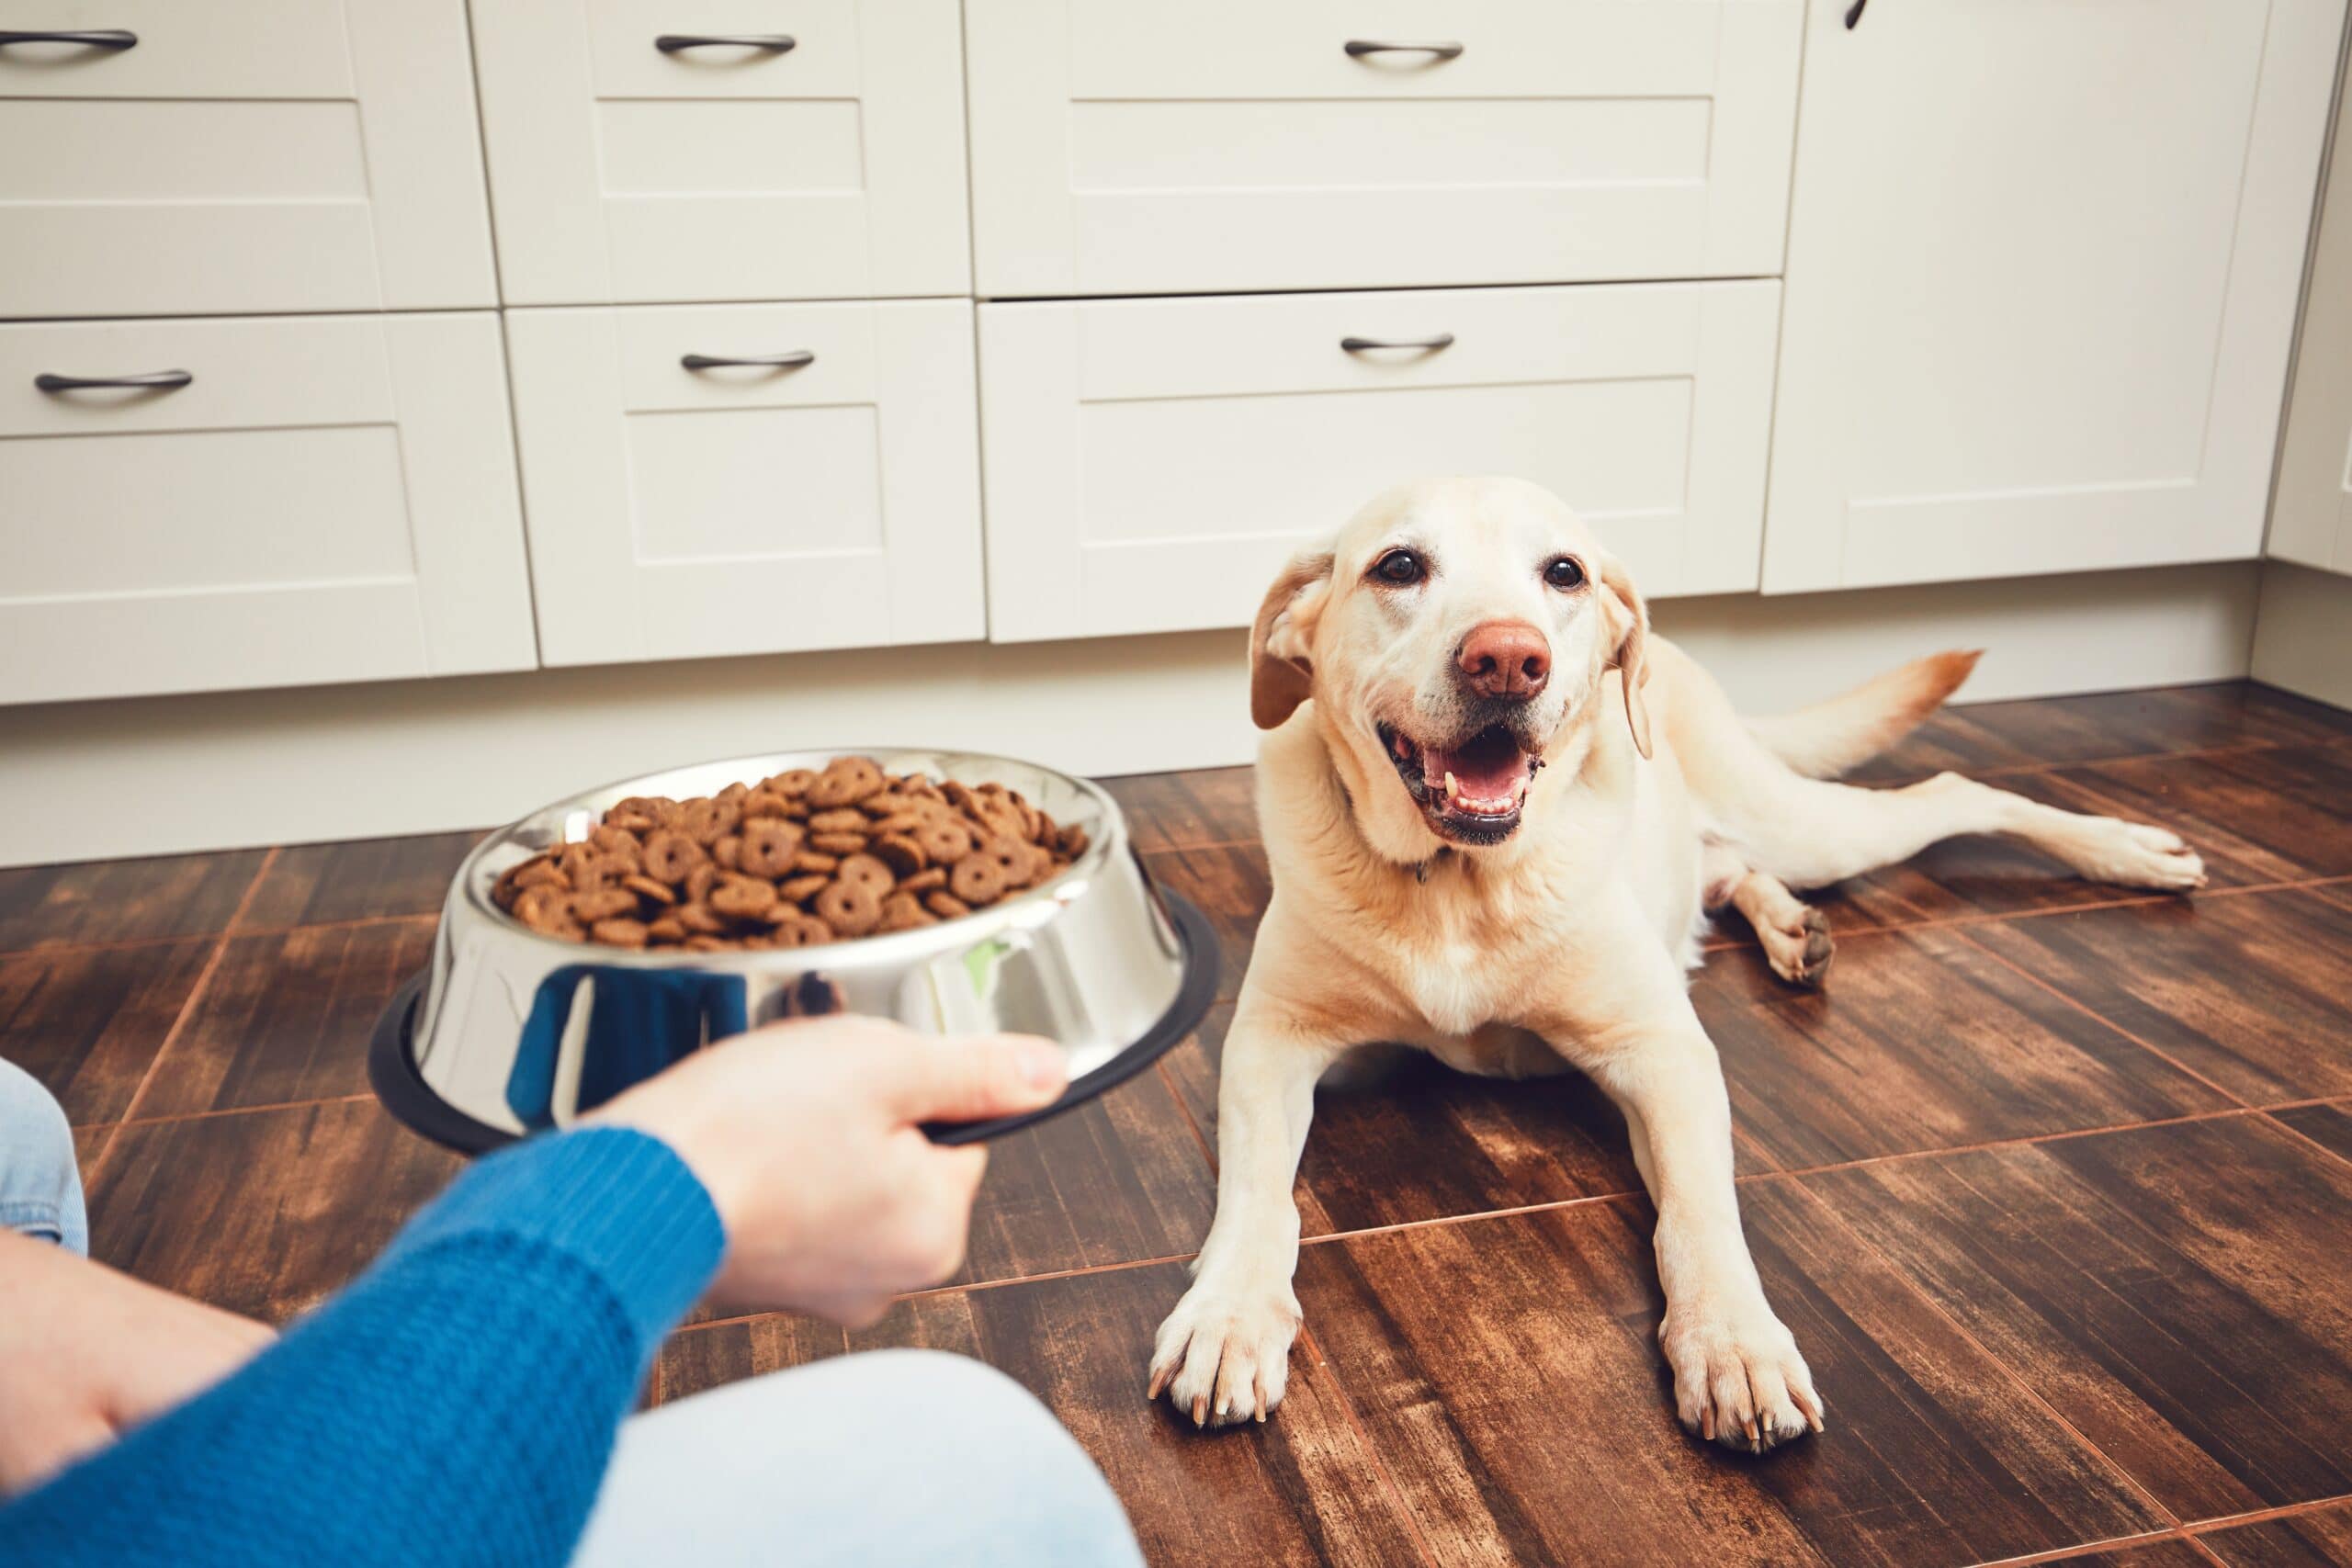 How to stop a dog from being possessive of food?